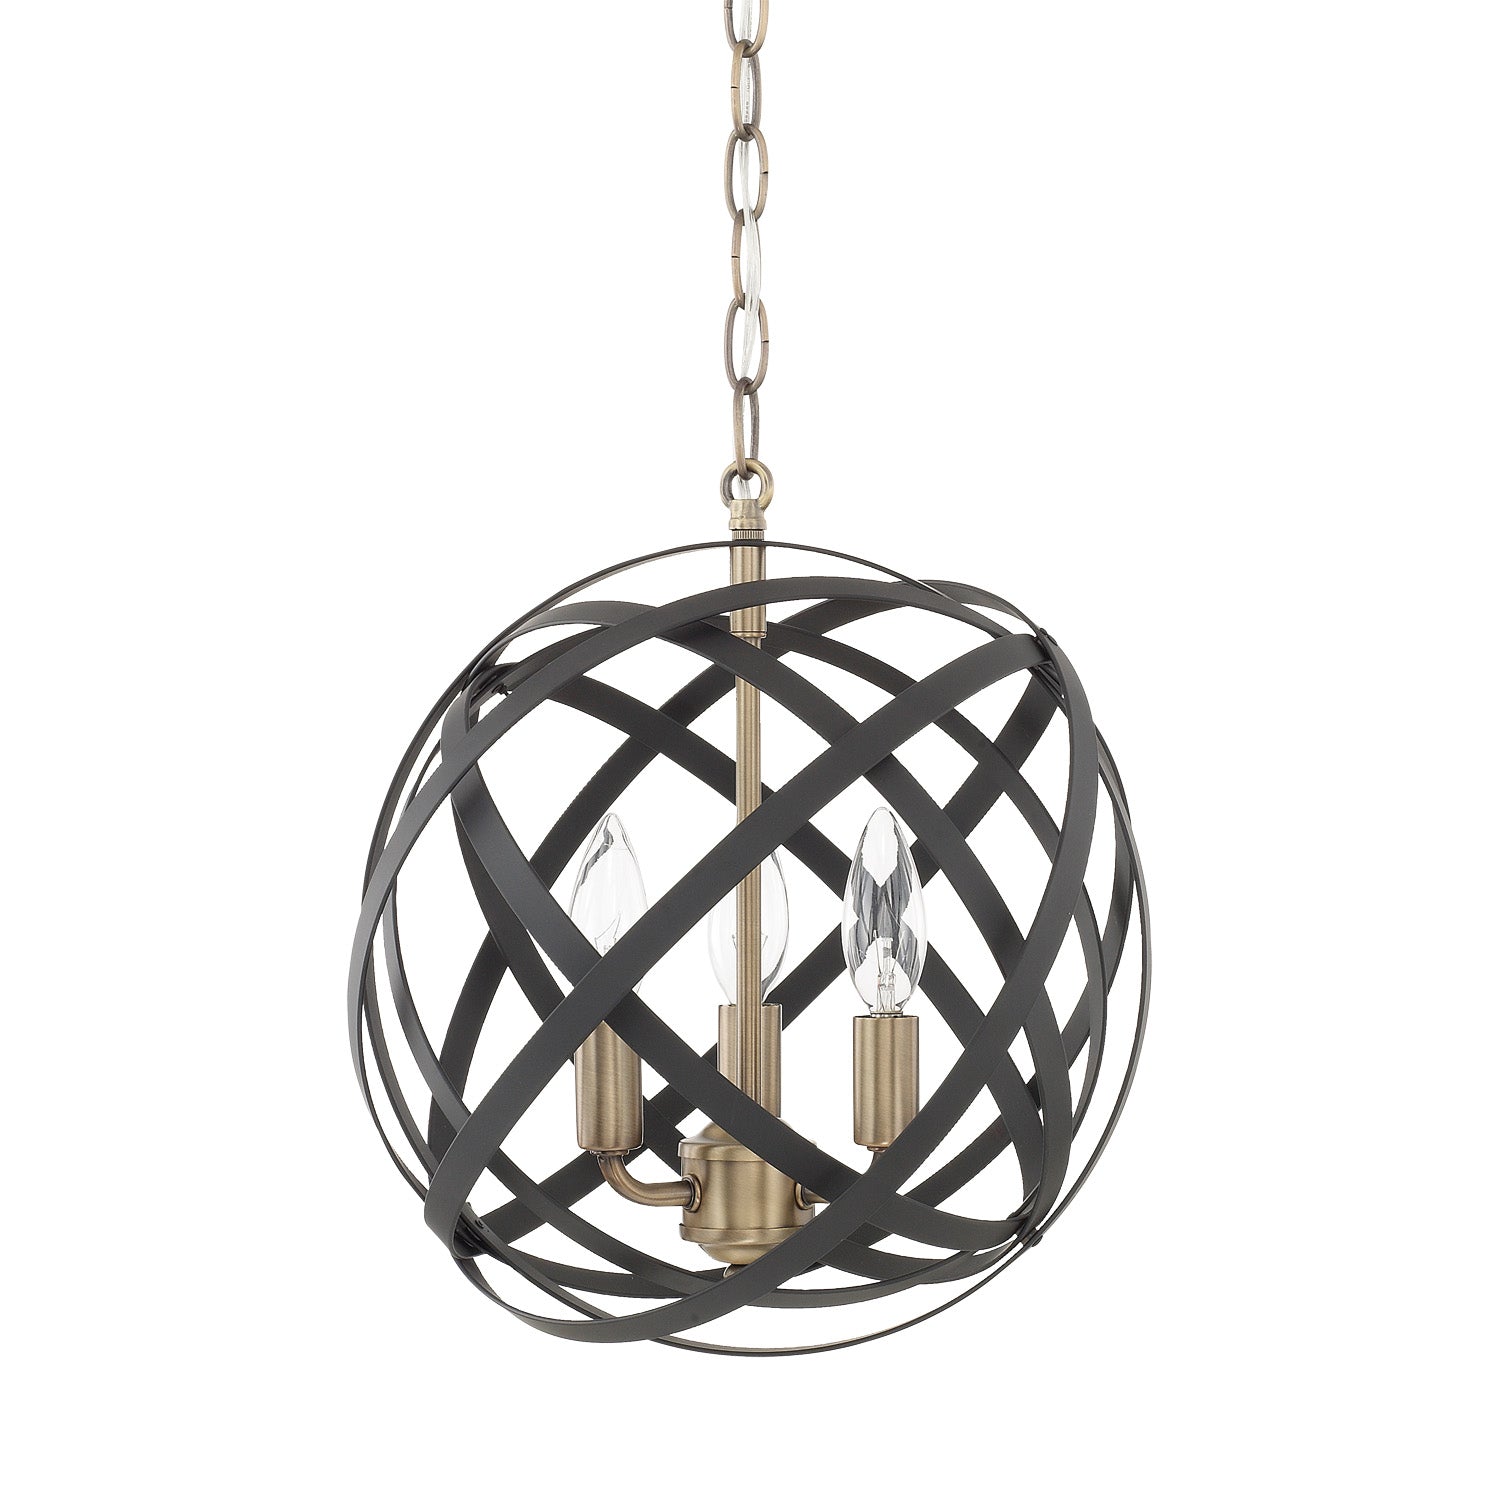 Capital Axis 4233AB Pendant Light - Aged Brass and Black